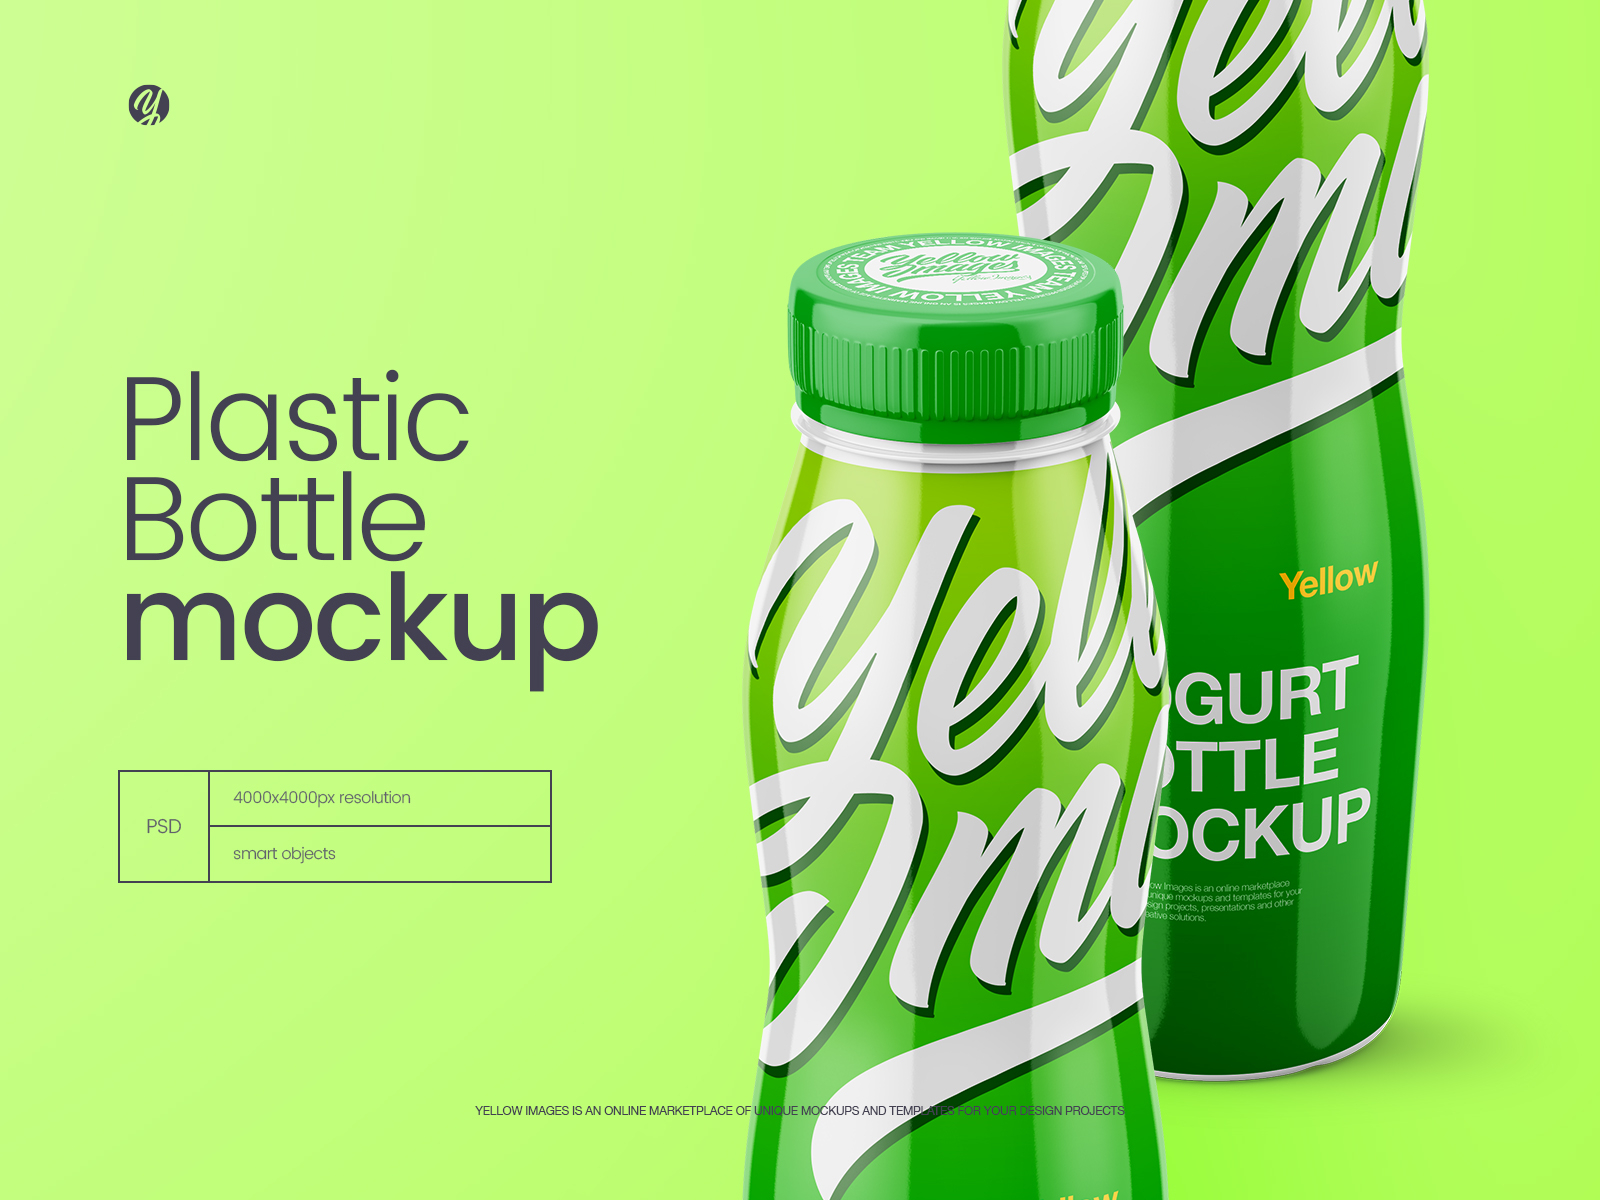 Download Drink Bottle Mockup Free Download Download Free And Premium Psd Mockup Templates And Design Assets PSD Mockup Templates